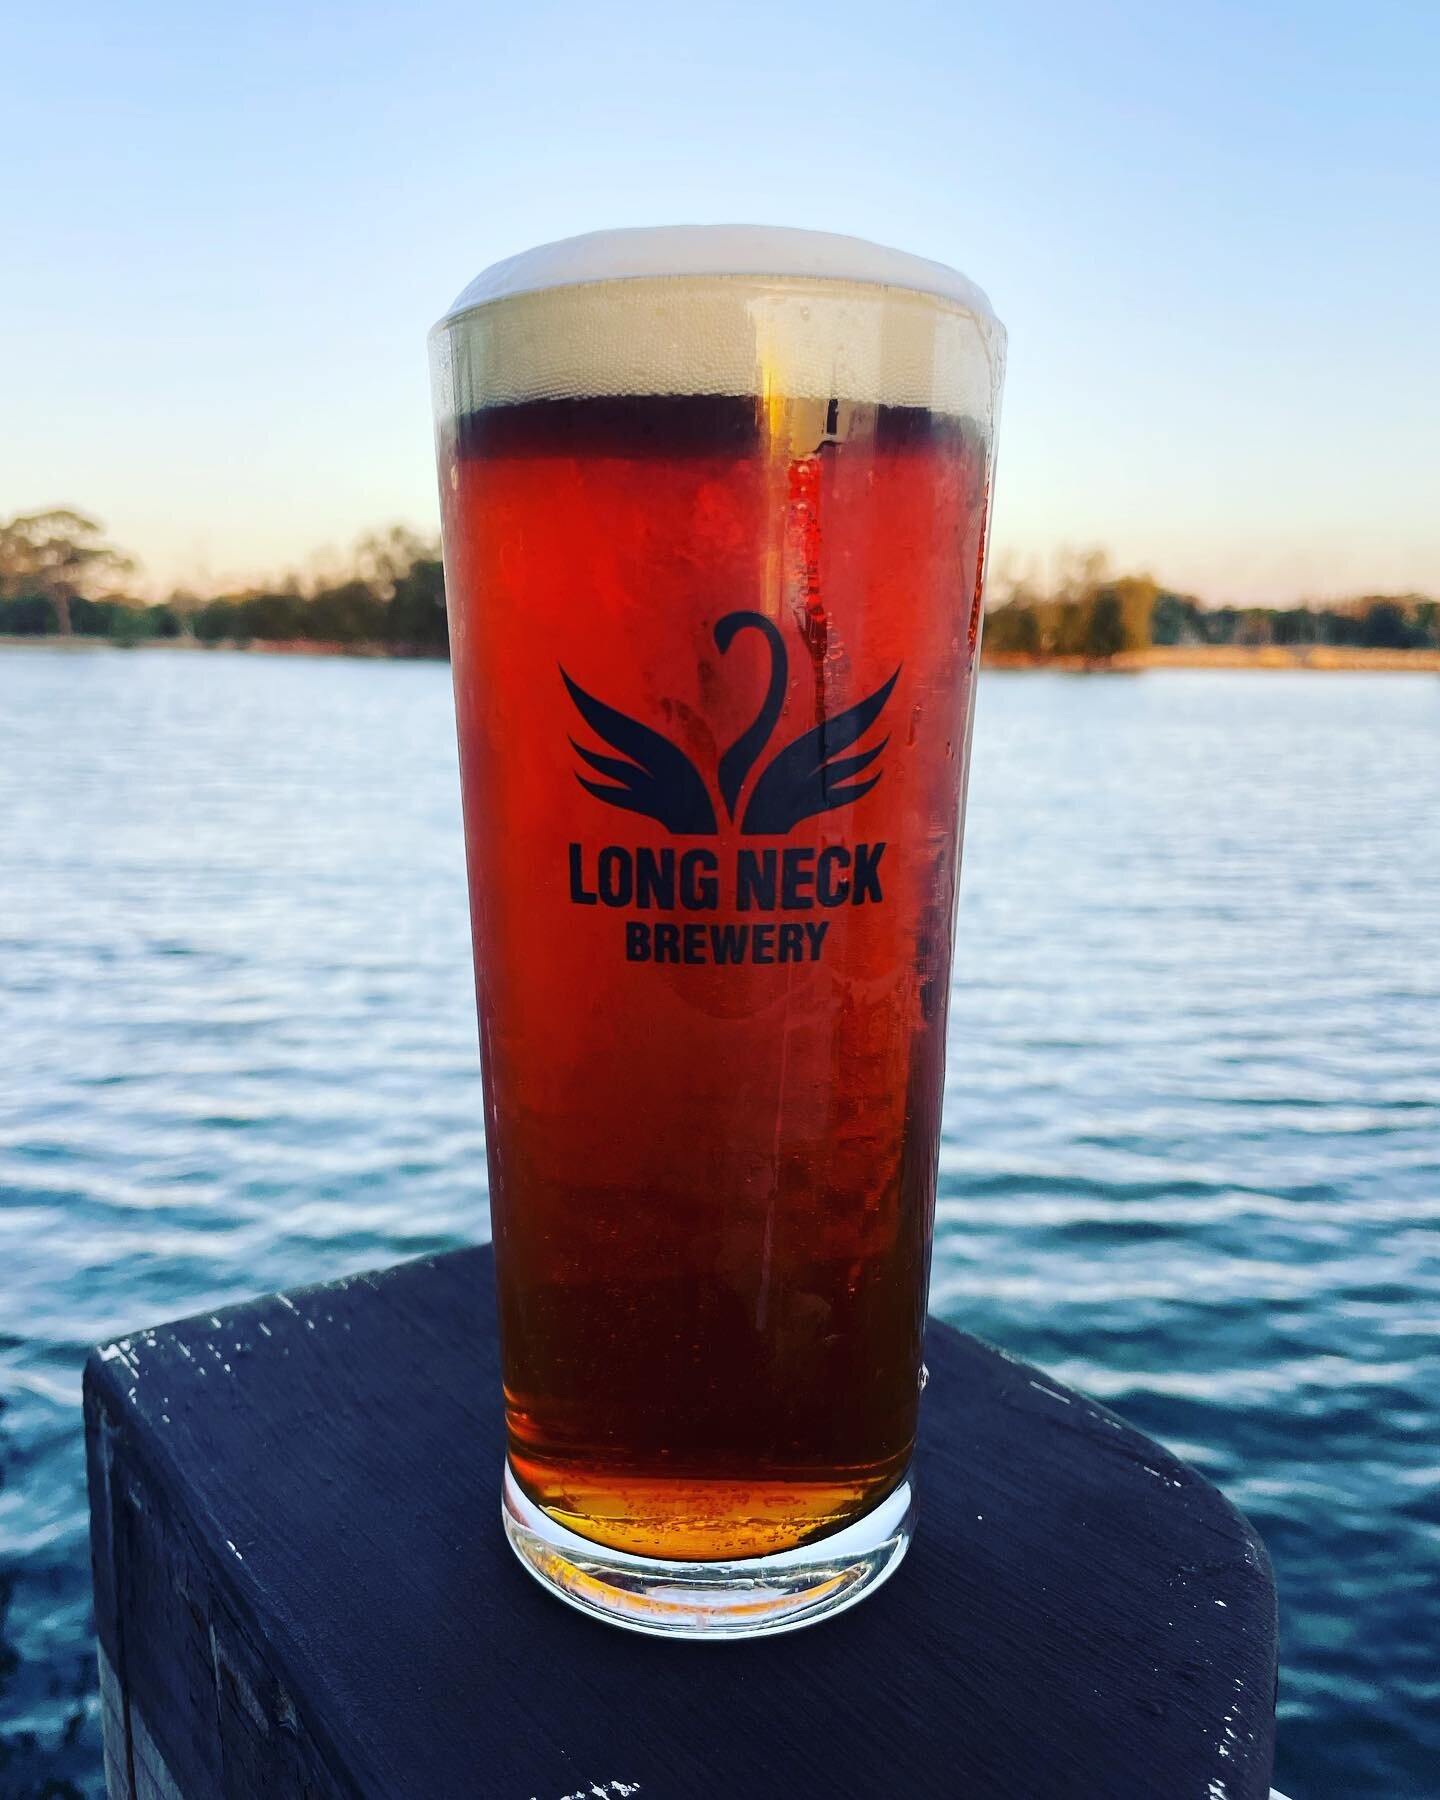 Finish out a stunning winters day with a Red Ale in hand for the sunset over the river!
.
.
.
#perthbeer #longneckbrewery #redale #perthbeersnobs #eastperth #justanotherdayinwa #westisbest #swanriver #perthsunset #cheers #friyay #perthweekend #longne